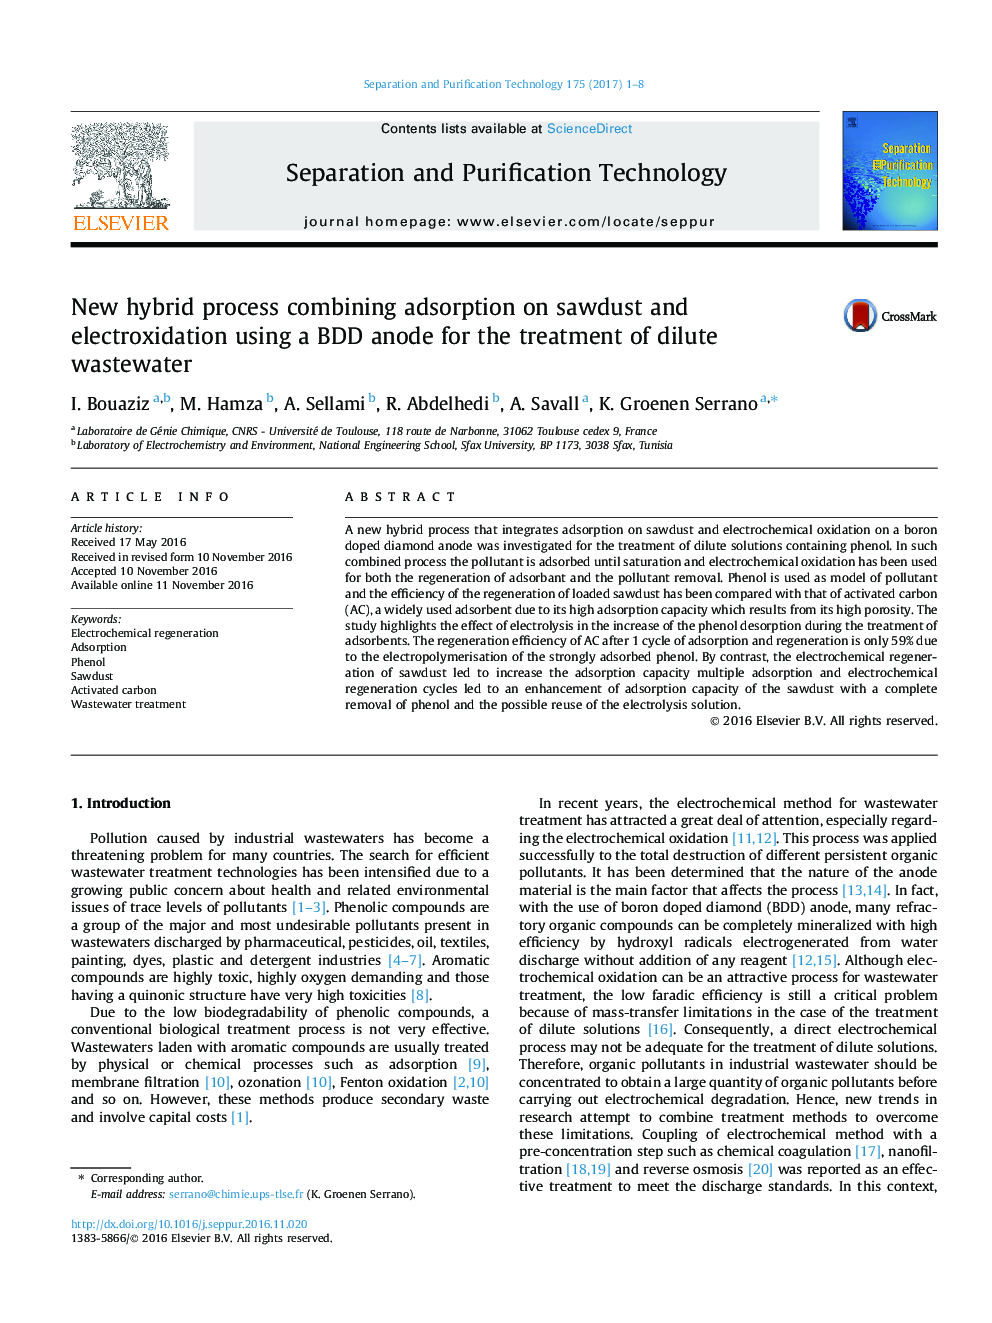 New hybrid process combining adsorption on sawdust and electroxidation using a BDD anode for the treatment of dilute wastewater